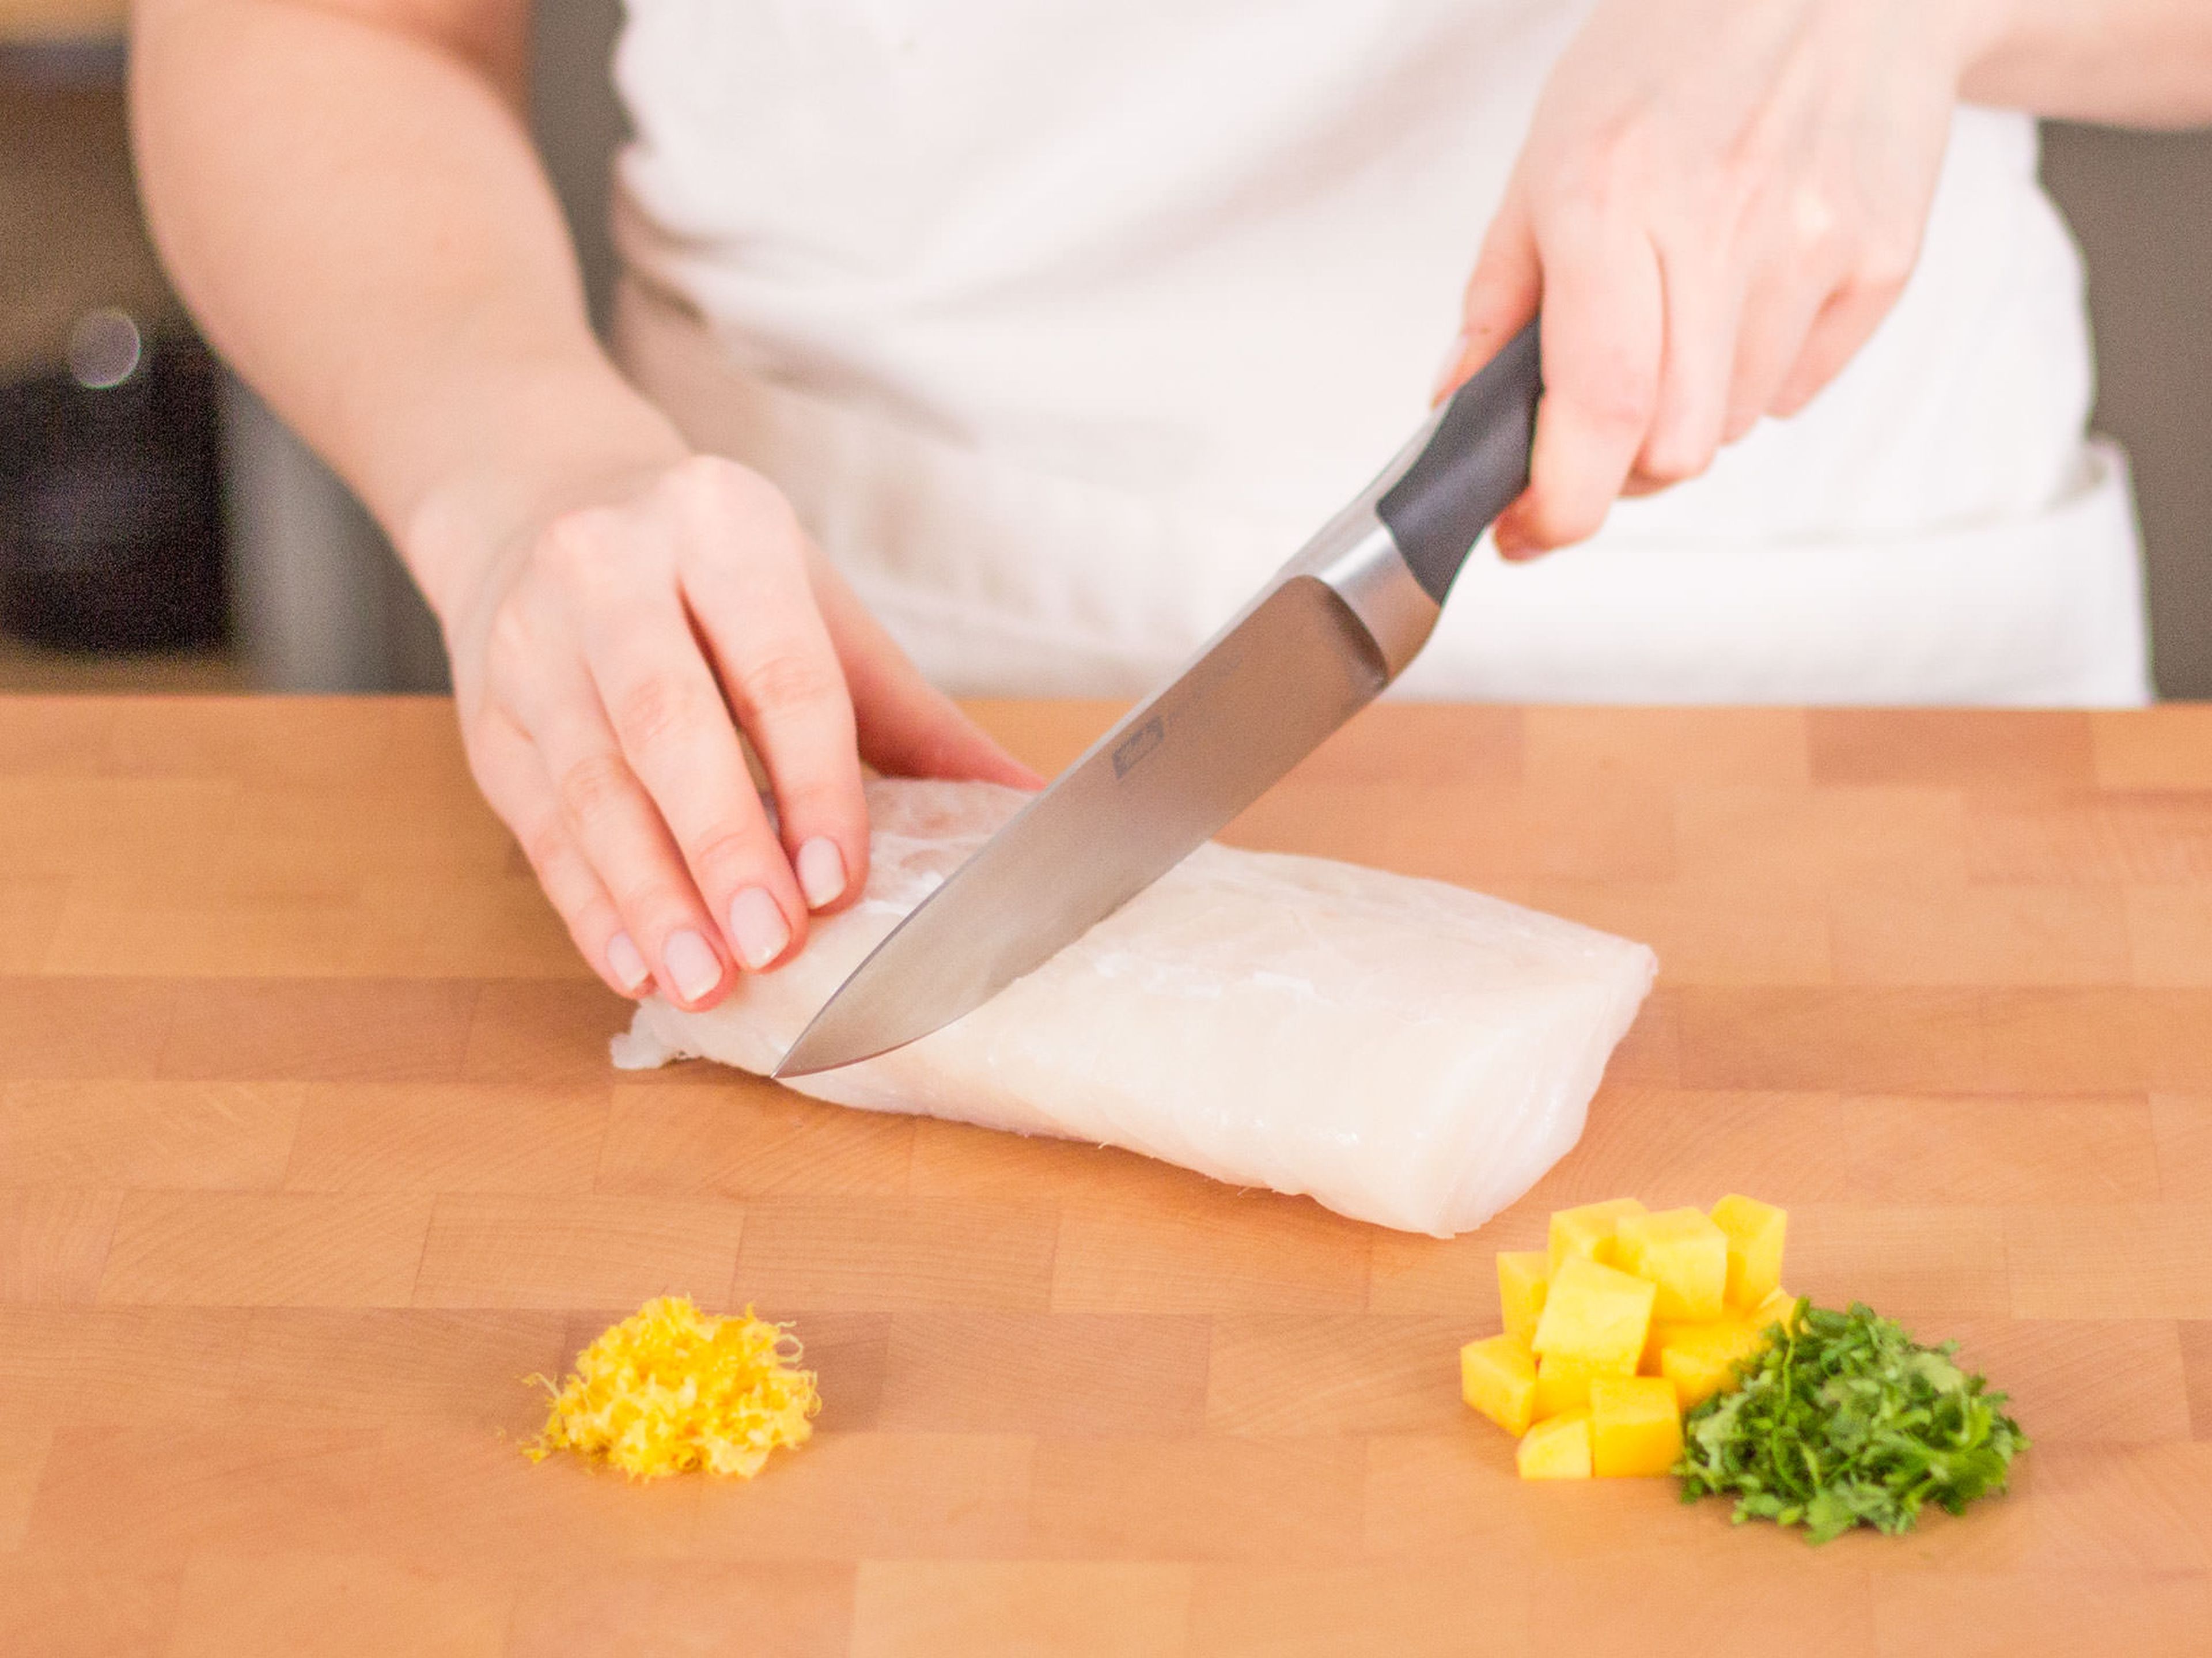 Peel and dice mango. Finely chop cilantro. Grate lemon peel and cut cod in two equal-sized fillets.